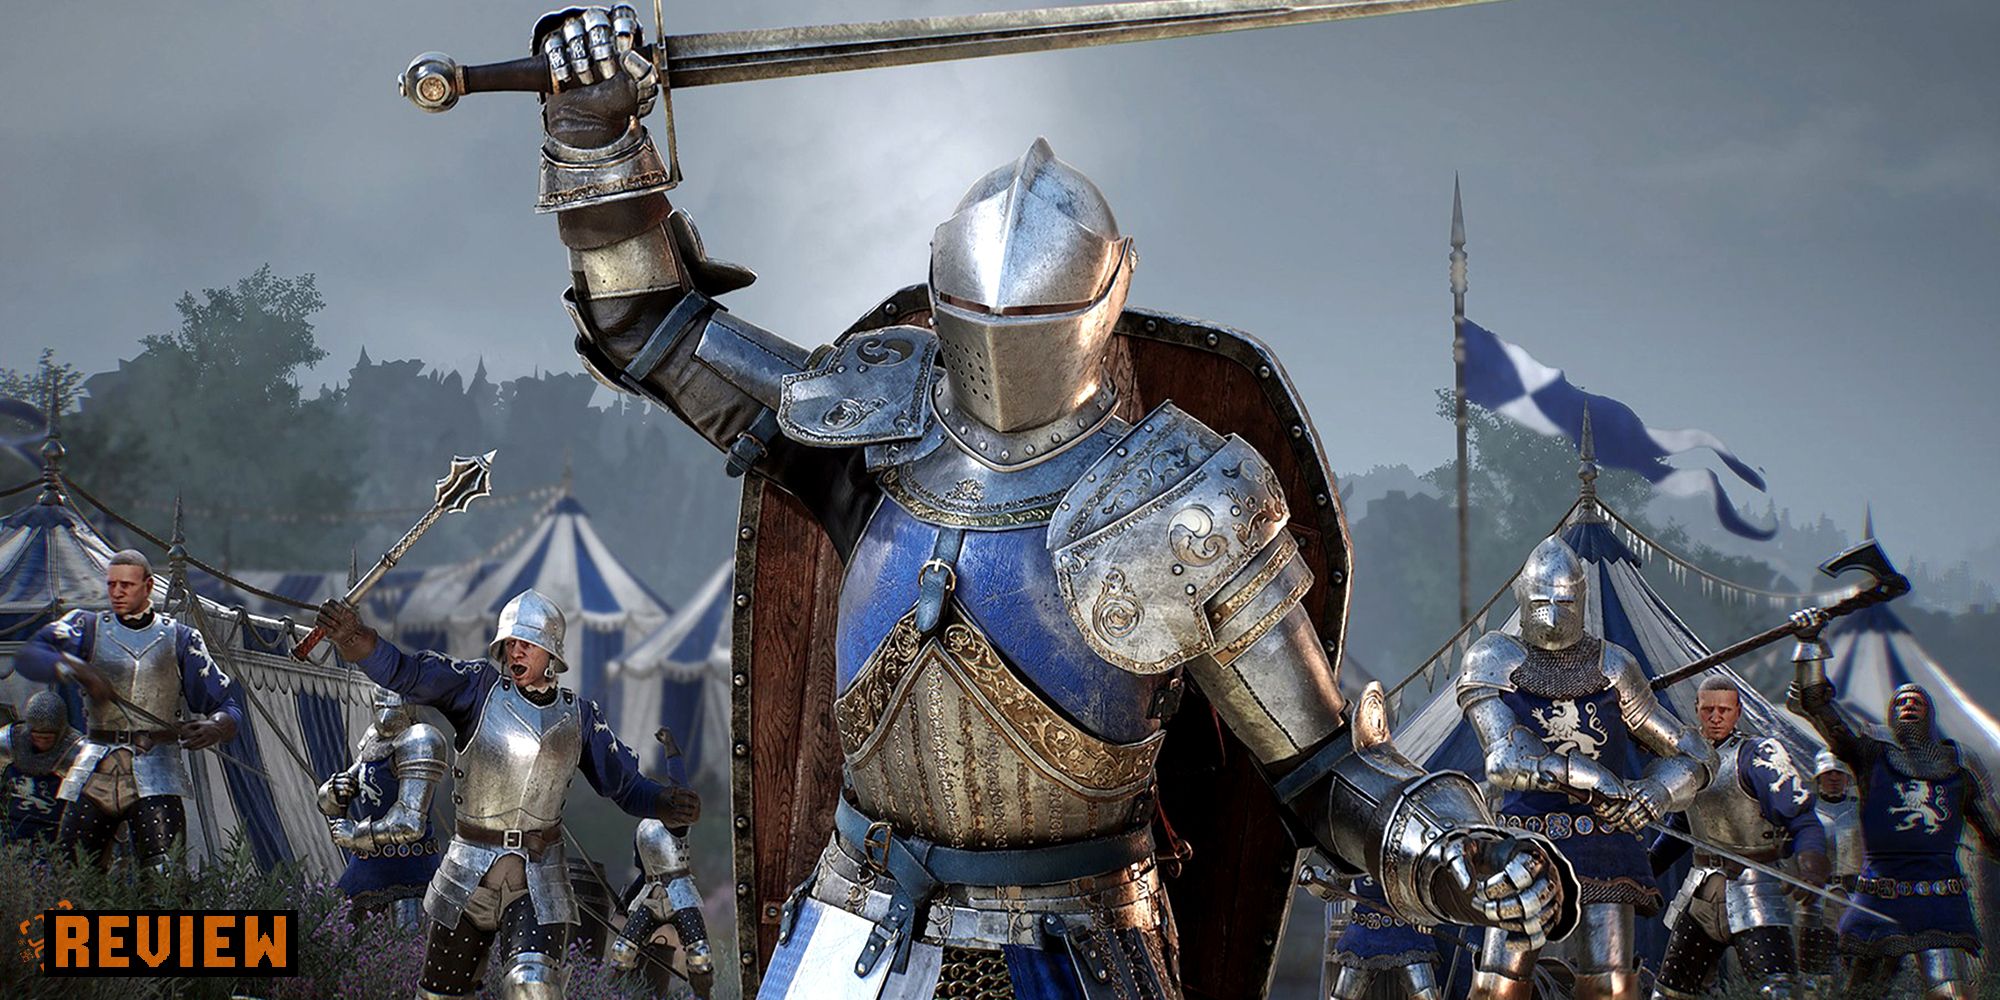 Game screen from Chivalry 2.